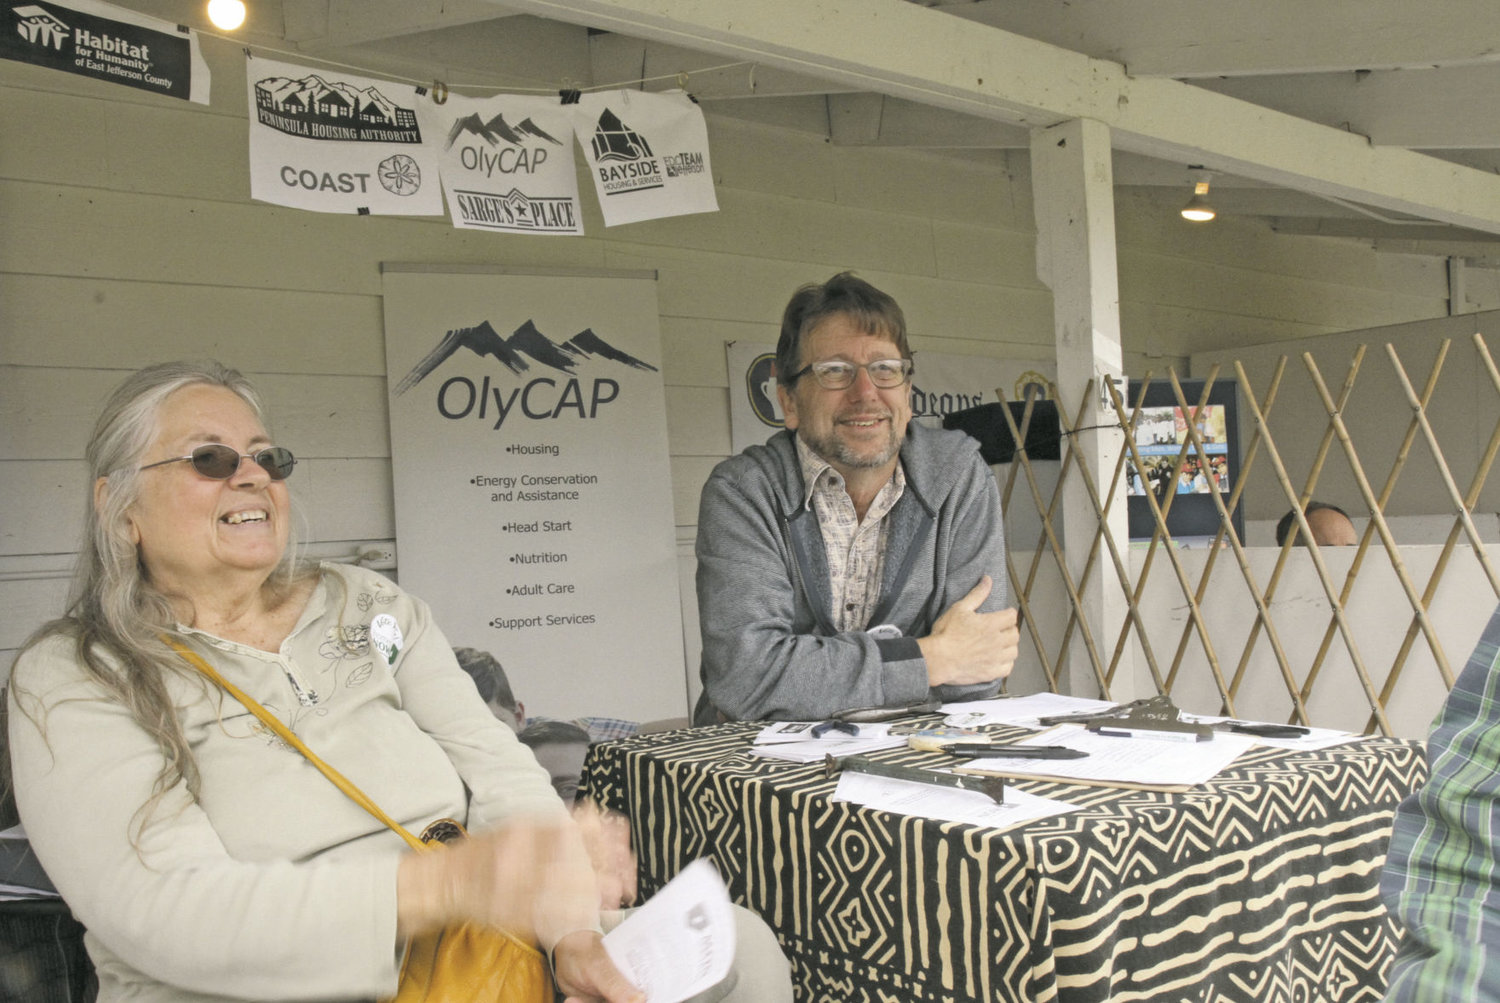 Pat Teal, who built a home through Peninsula Housing Authority’s self-help program (left), sits with Bruce Cowan (right) at a Homes Now booth at the Jefferson County Fair. The two talked to people about an upcoming proposition to raise property tax revenue as a means to support affordable housing projects in Jefferson County. Homes Now is the name of the political campaign advocating the passage of the proposal. Photo by Allison Arthur